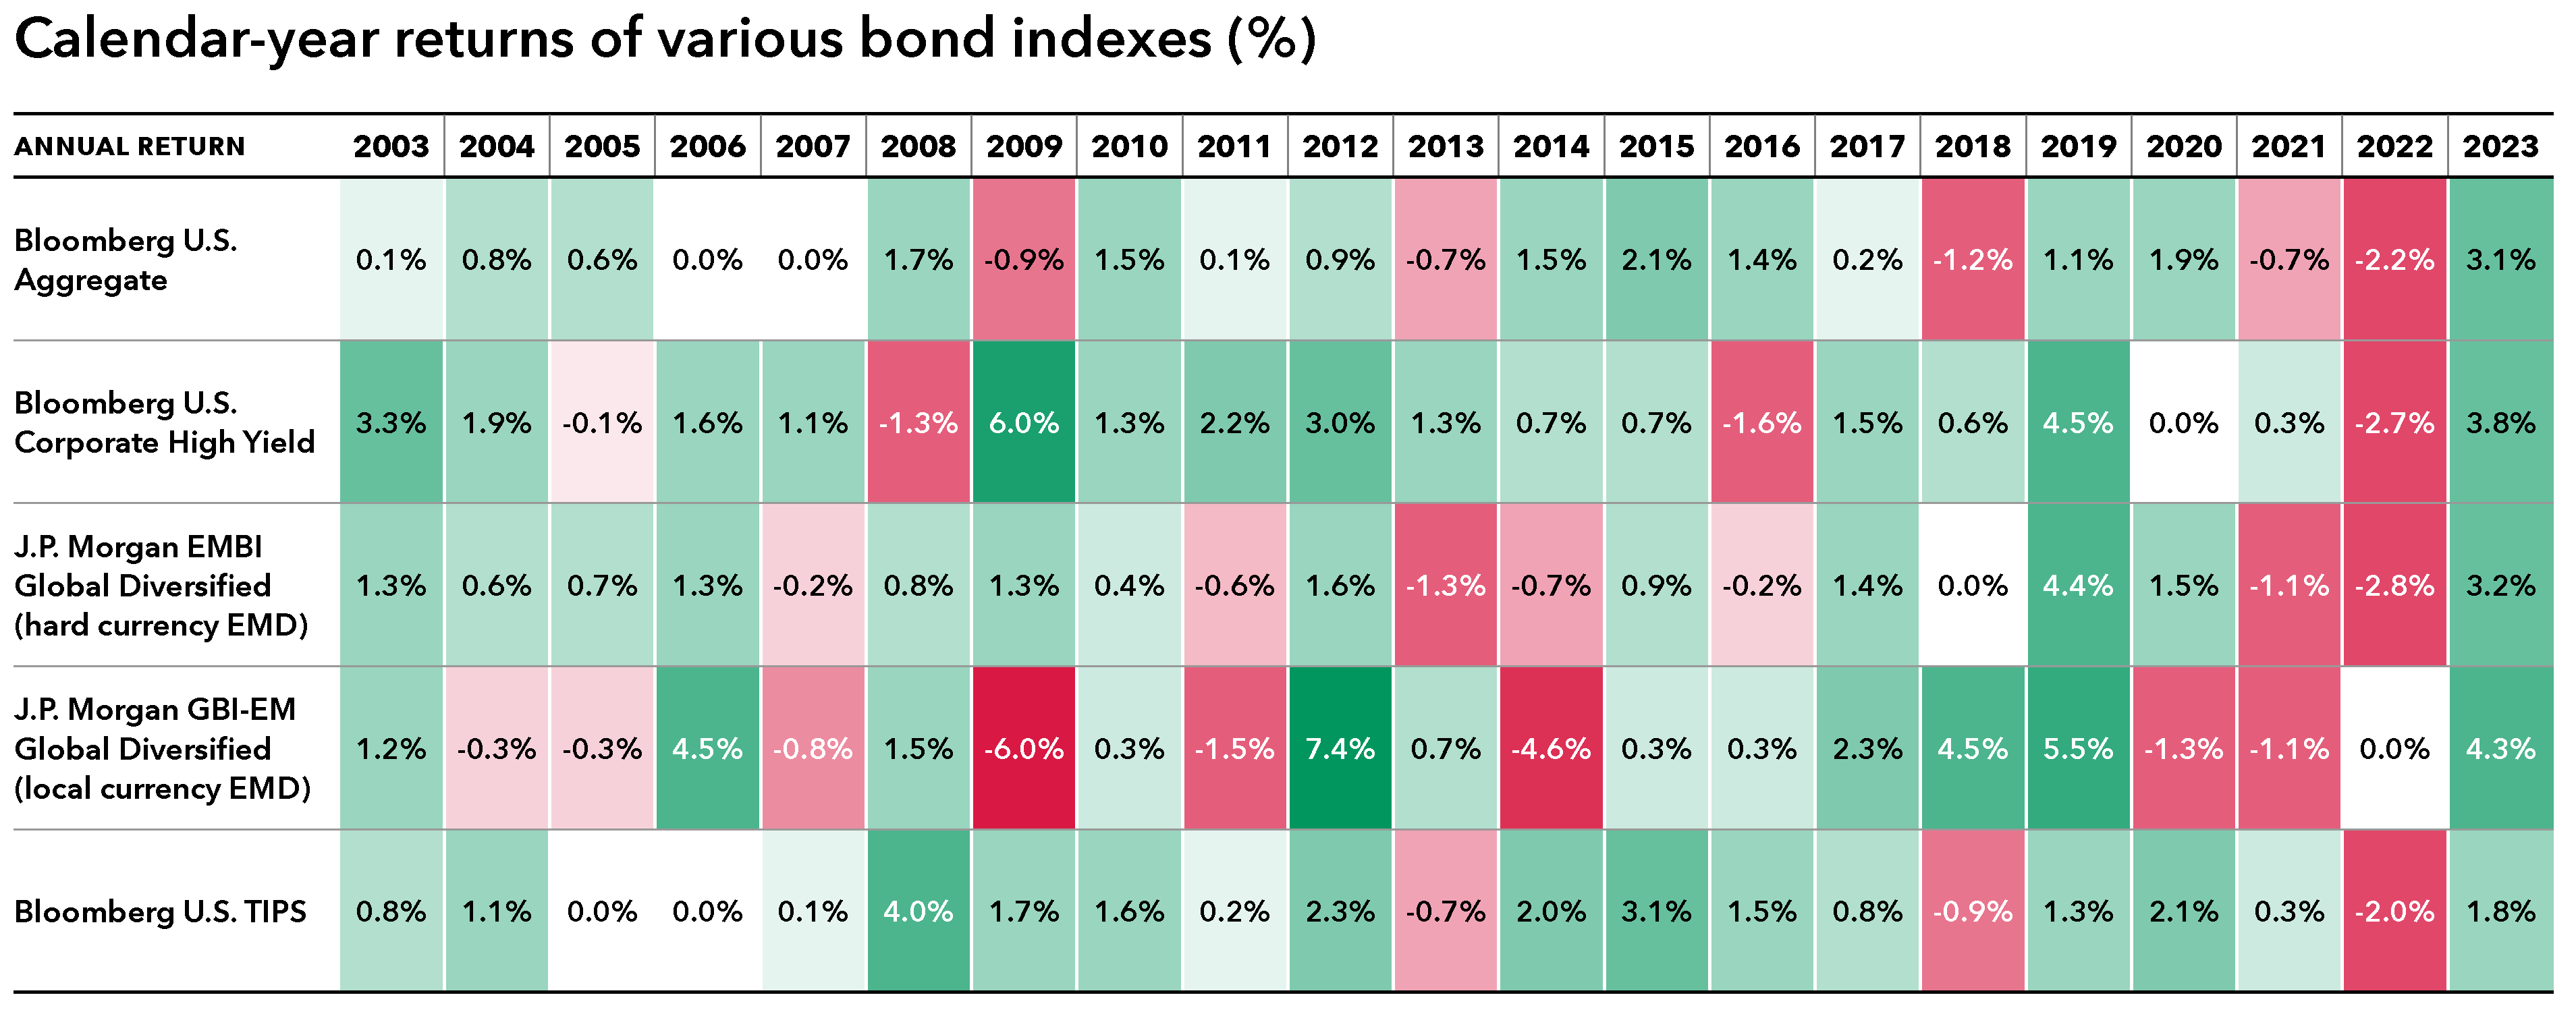 This chart is a heat map showing returns for the calendar years 2003 to 2023 for the following fixed income indices: Bloomberg U.S. Aggregate Index, Bloomberg U.S. Corporate  High Yield Index, J.P. Morgan EMBI Global Diversified Index (hard currency emerging markets debt), J.P. Morgan GBI-EM Global Diversified Index (local currency emerging markets debt), and Bloomberg U.S. Treasury Inflation-Protected Securities (TIPS) Index. The higher returns are in shades of green (the darker the green, the higher the return). The lower returns are in shades of red (the darker the red, the lower the return). The data points are: Bloomberg U.S. Aggregate Index — 2003: 0.1%, 2004: 0.8%, 2005: 0.6%, 2006: 0.0%, 2007: 0.0%, 2008: 1.7%, 2009: -0.9%, 2010: 1.5%, 2011: 0.1%, 2012: 0.9%, 2013: -0.7%, 2014: 1.5%, 2015: 2.1%, 2016: 1.4%, 2017: 0.2%, 2018: -1.2%, 2019: 1.1%, 2020: 1.9%, 2021: -0.7%, 2022: -2.2%, 2023: 3.1%. Bloomberg U.S. Corporate High Yield Index — 2003: 3.3%, 2004: 1.9%, 2005: -0.1%, 2006: 1.6%, 2007: 1.1%, 2008: -1.3%, 2009: 6.0%, 2010: 1.3%, 2011: 2.2%, 2012: 3.0%, 2013: 1.3%, 2014: 0.7%, 2015: 0.7%, 2016: -1.6%, 2017: 1.5%, 2018: 0.6%, 2019: 4.5%, 2020: 0.0%, 2021: 0.3%, 2022: -2.7%, 2023: 3.8%. J.P. Morgan EMBI Global Diversified Index (hard currency EMD) — 2003: 1.3%, 2004: 0.6%, 2005: 0.7%, 2006: 1.3%, 2007: -0.2%, 2008: 0.8%, 2009: 1.3%, 2010: 0.4%, 2011: -0.6%, 2012: 1.6%, 2013: -1.3%, 2014: -0.7%, 2015: 0.9%, 2016: -0.2%, 2017: 1.4%, 2018: 0.0%, 2019: 4.4%, 2020: 1.5%, 2021: -1.1%, 2022: -2.8%, 2023: 3.2%. J.P. Morgan GBI-EM Global Diversified Index (local currency EMD) — 2003: 1.2%, 2004: -0.3%, 2005: -0.3%, 2006: 4.5%, 2007: -0.8%, 2008: 1.5%, 2009: -6.0%, 2010: 0.3%, 2011: -1.5%, 2012: 7.4%, 2013: 0.7%, 2014: -4.6%, 2015: 0.3%, 2016: 0.3%, 2017: 2.3%, 2018: 4.5%, 2019: 5.5%, 2020: -1.3%, 2021: -1.1%, 2022: 0.0%, 2023: 4.3%. Bloomberg U.S. TIPS Index — 2003: 0.8%, 2004: 1.1%, 2005: 0.0%, 2006: 0.0%, 2007: 0.1%, 2008: 4.0%, 2009: 1.7%, 2010: 1.6%, 2011: 0.2%, 2012: 2.3%, 2013: -0.7%, 2014: 2.0%, 2015: 3.1%, 2016: 1.5%, 2017: 0.8%, 2018: -0.9%, 2019: 1.3%, 2020: 2.1%, 2021: 0.3%, 2022: -2.0%, 2023: 1.8%. 